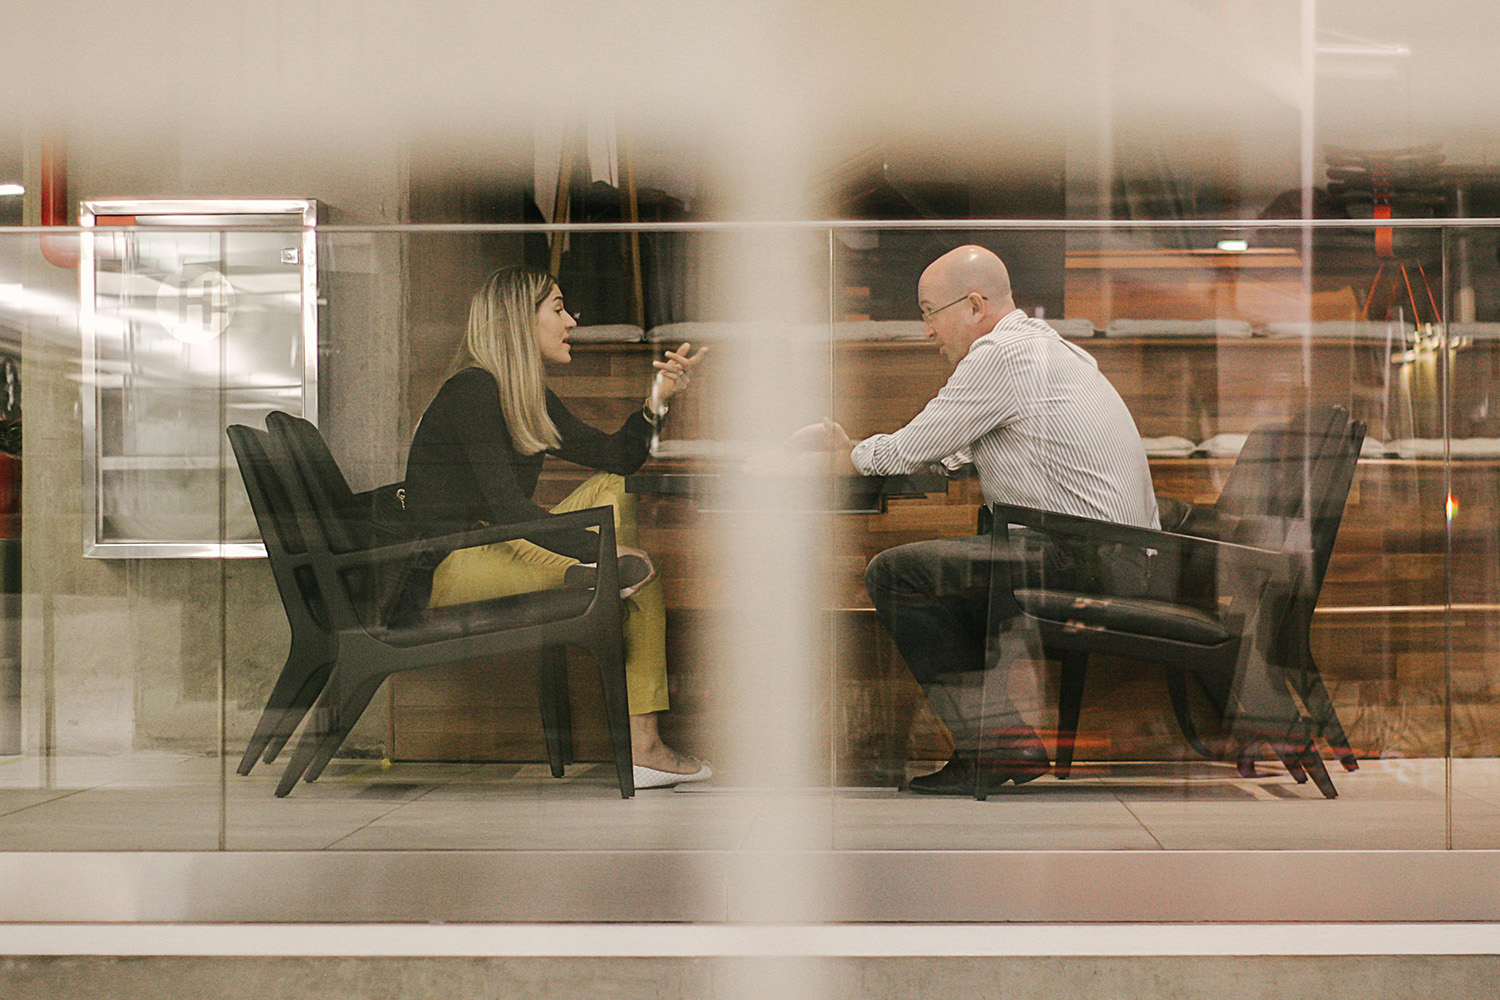 Image of 2 people in a business meeting through a glass window